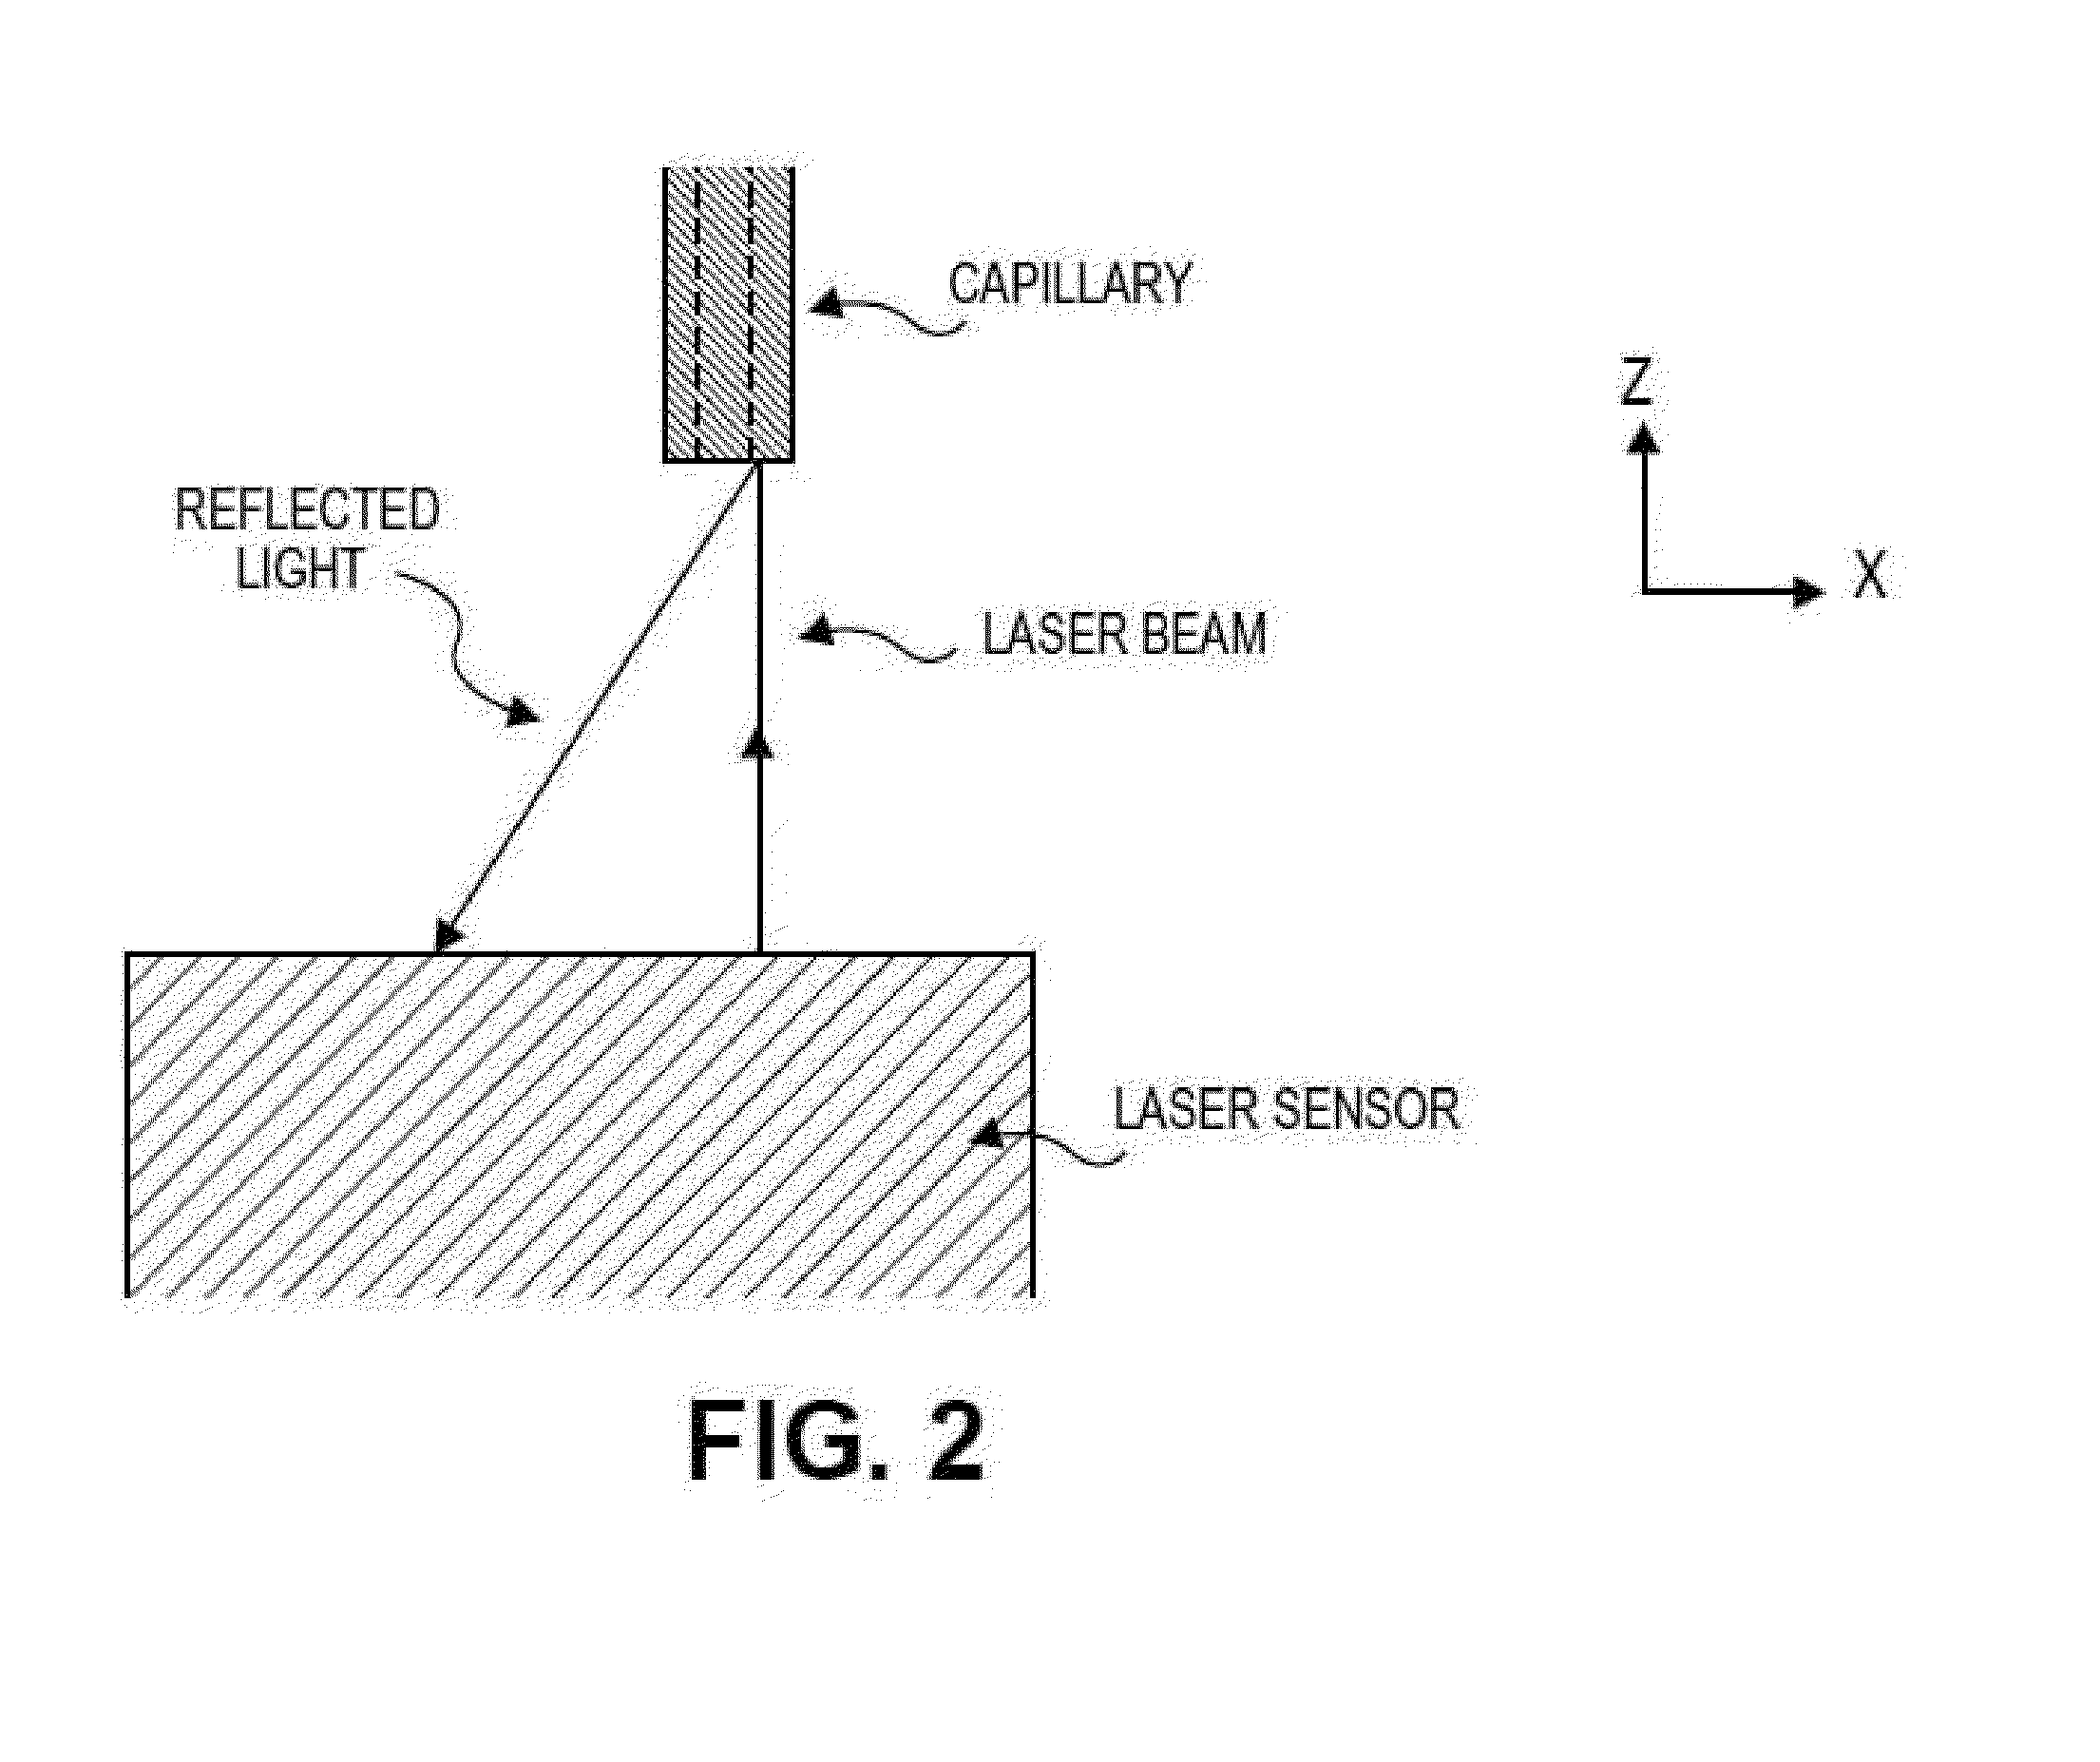 Devices, systems, and methods for the fabrication of tissue